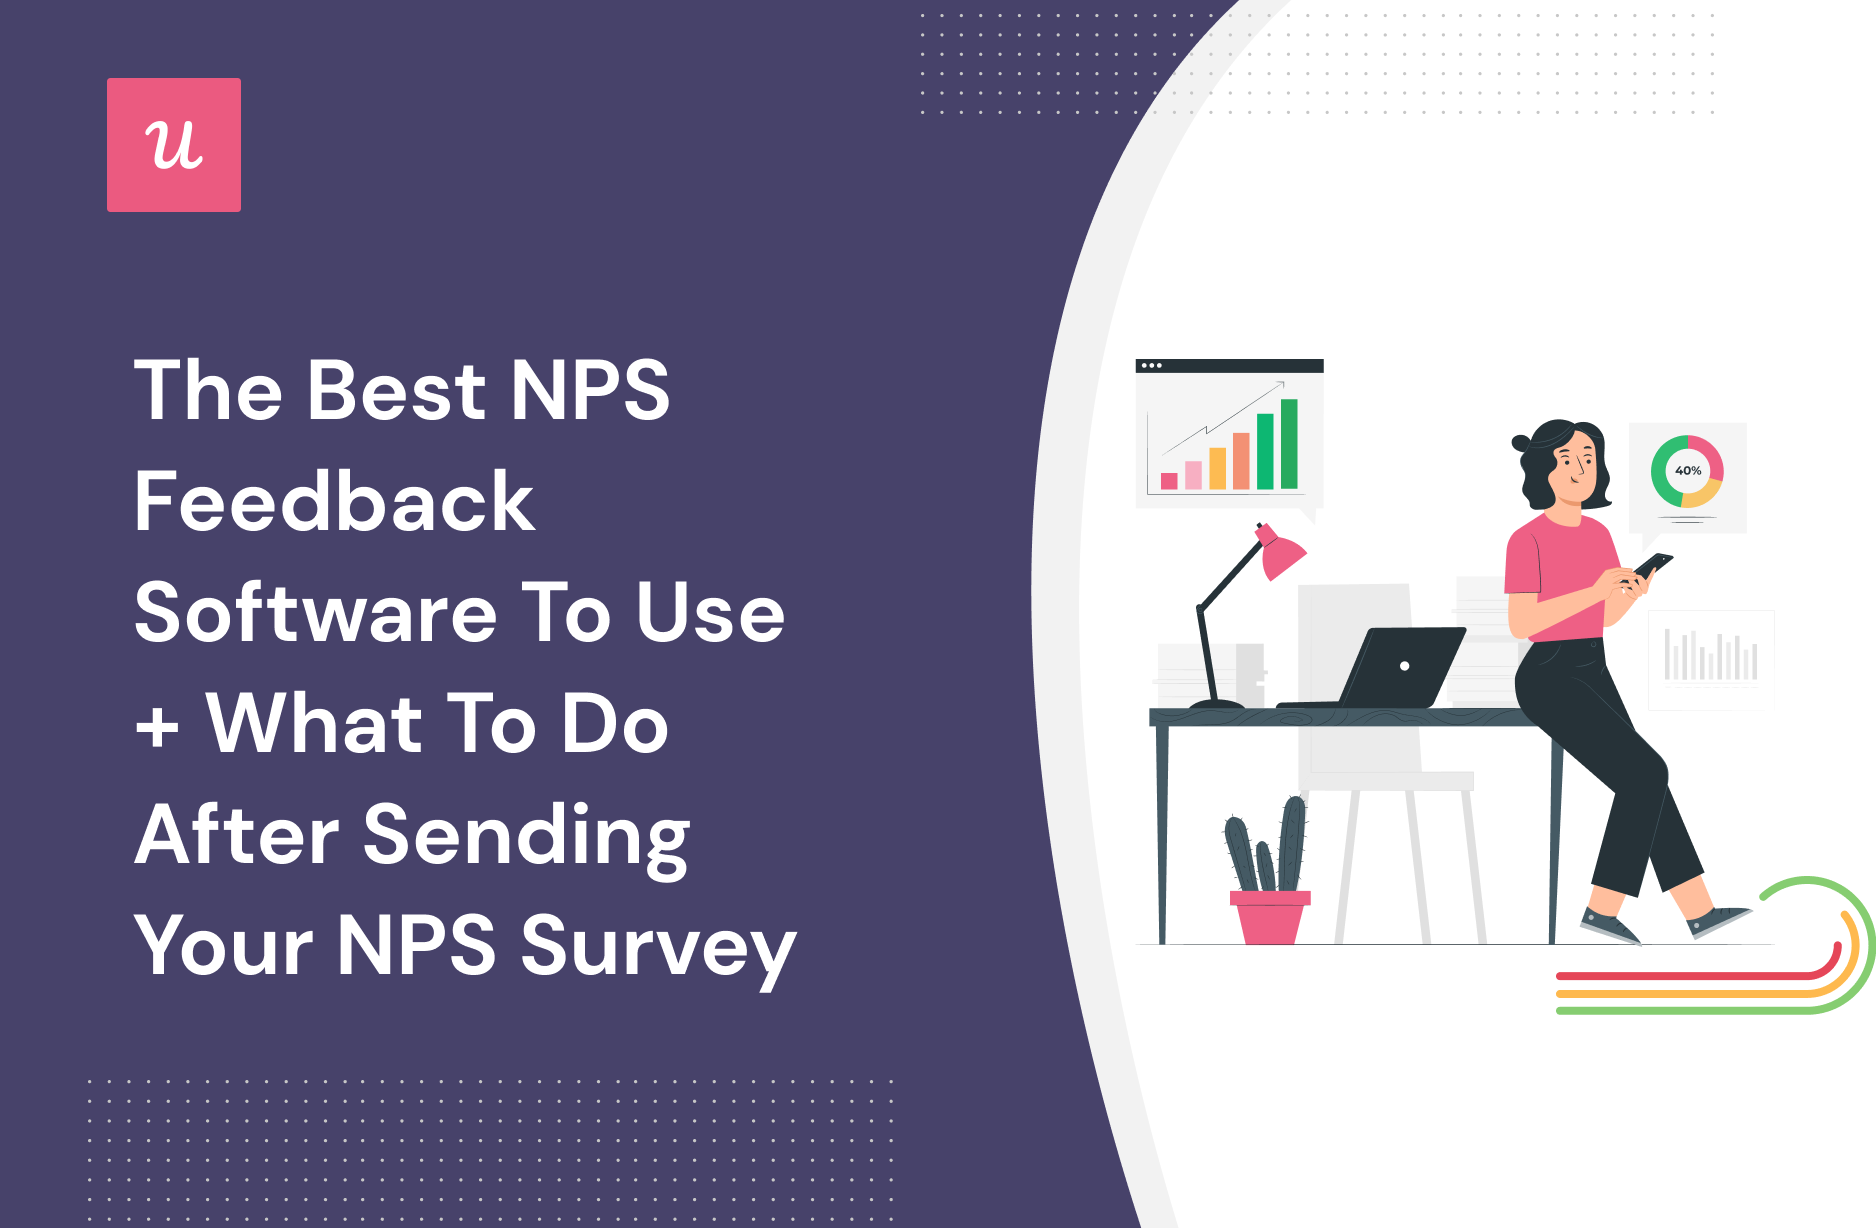 The Best NPS Feedback Software to Use